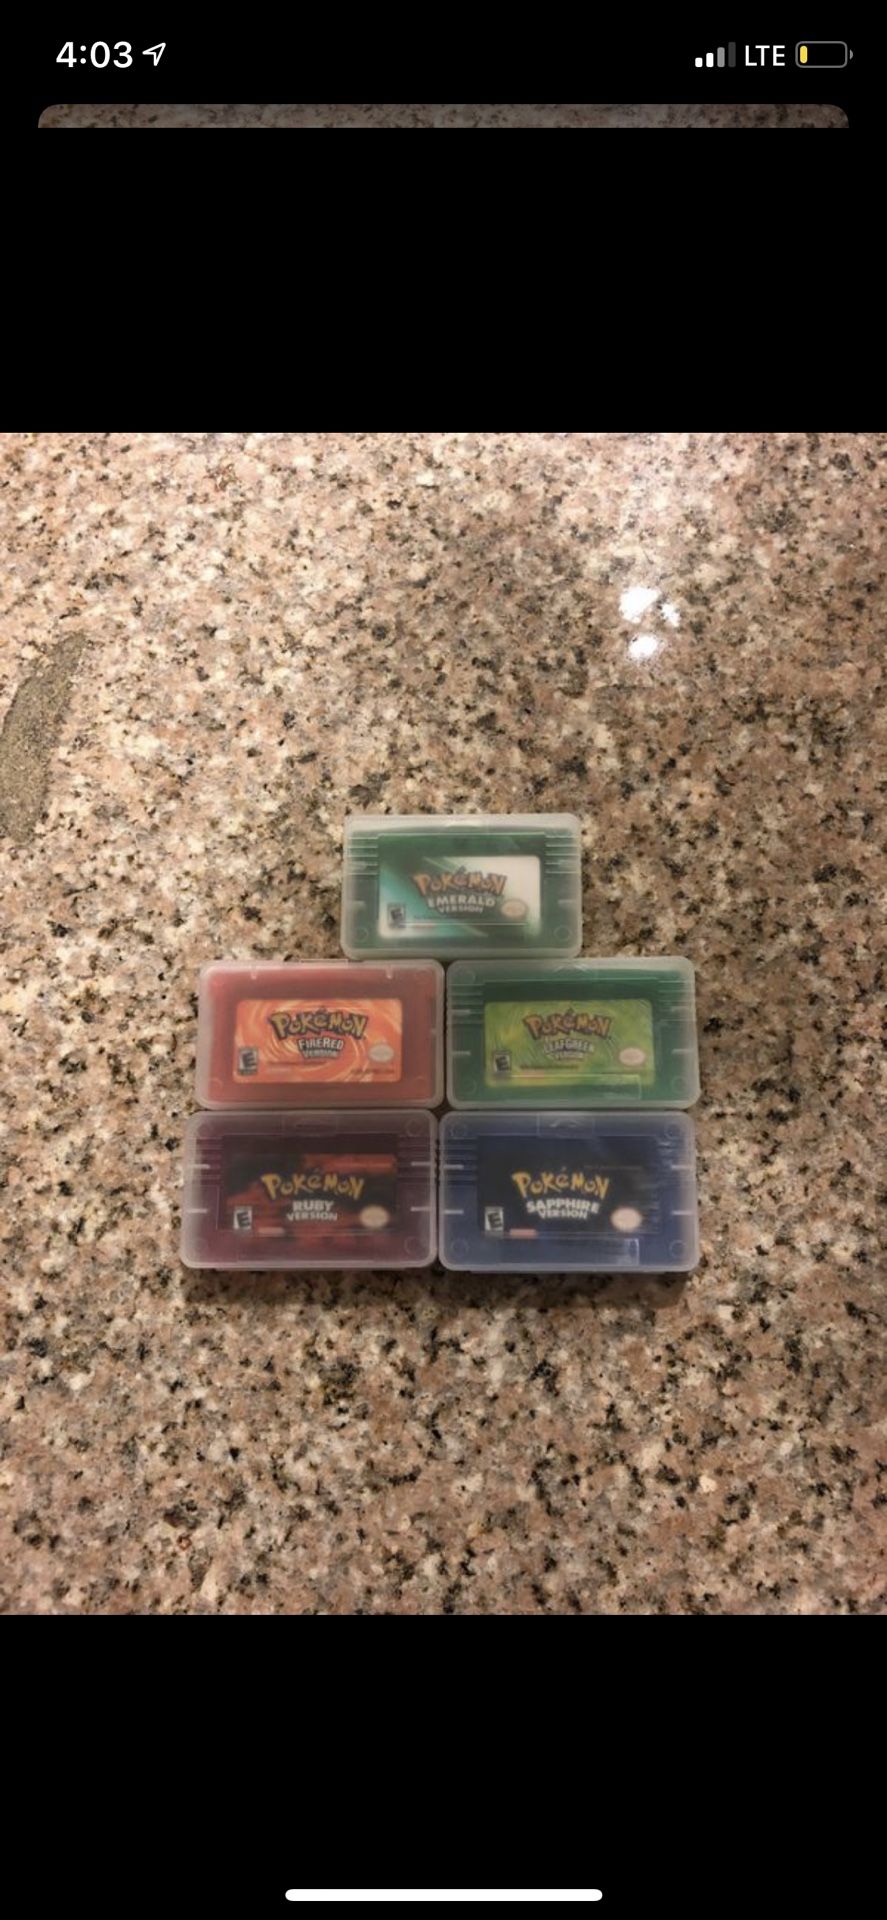 Full set of GBA Pokémon games. Reproduction